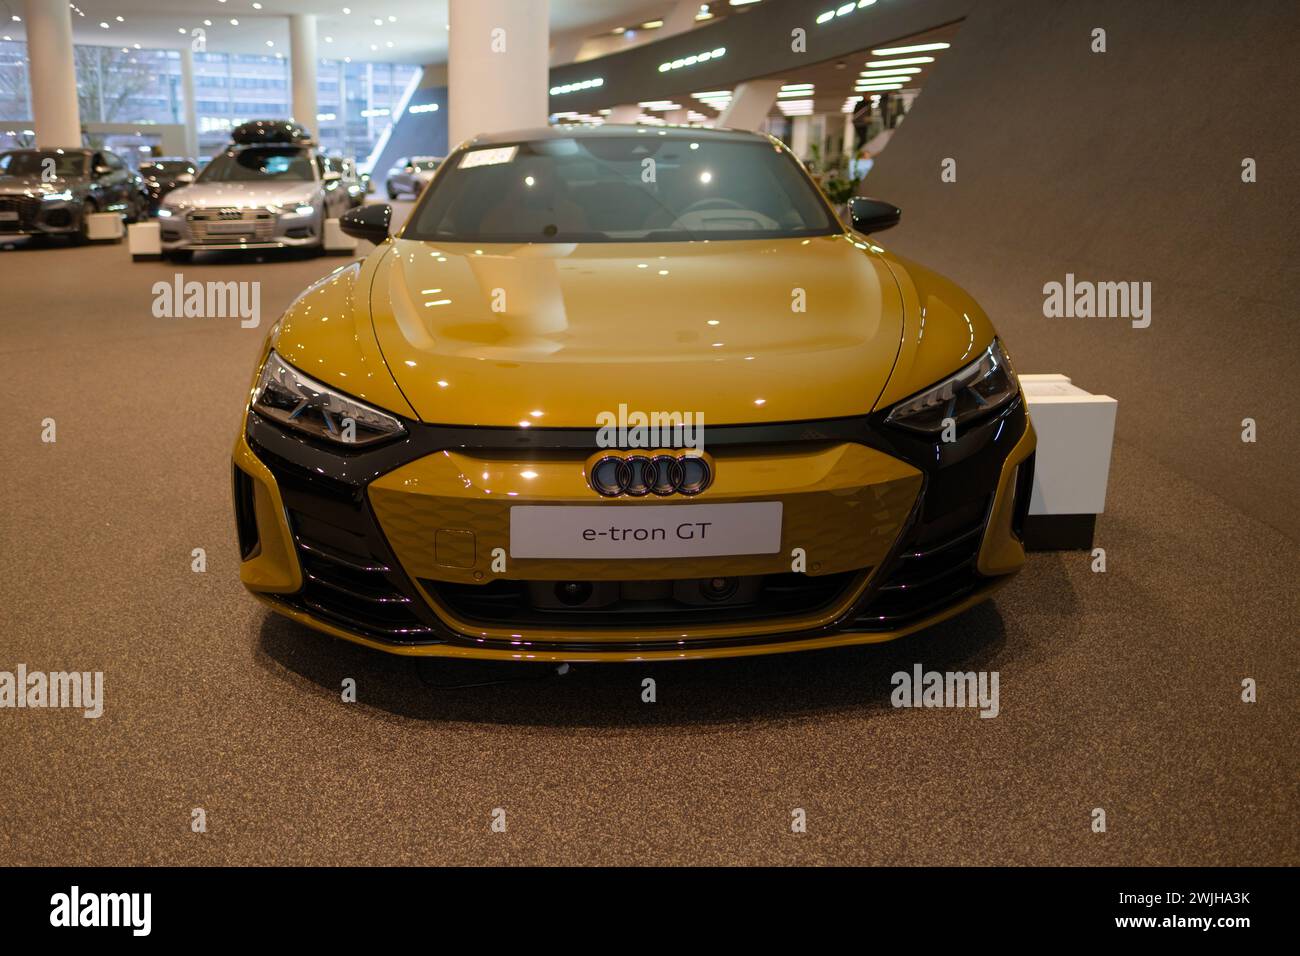 new Luxury Electric Car Audi e-tron GT, yellow limousine, four-door coupe in showroom, Automotive Innovation in automotive industry, Future Mobility s Stock Photo